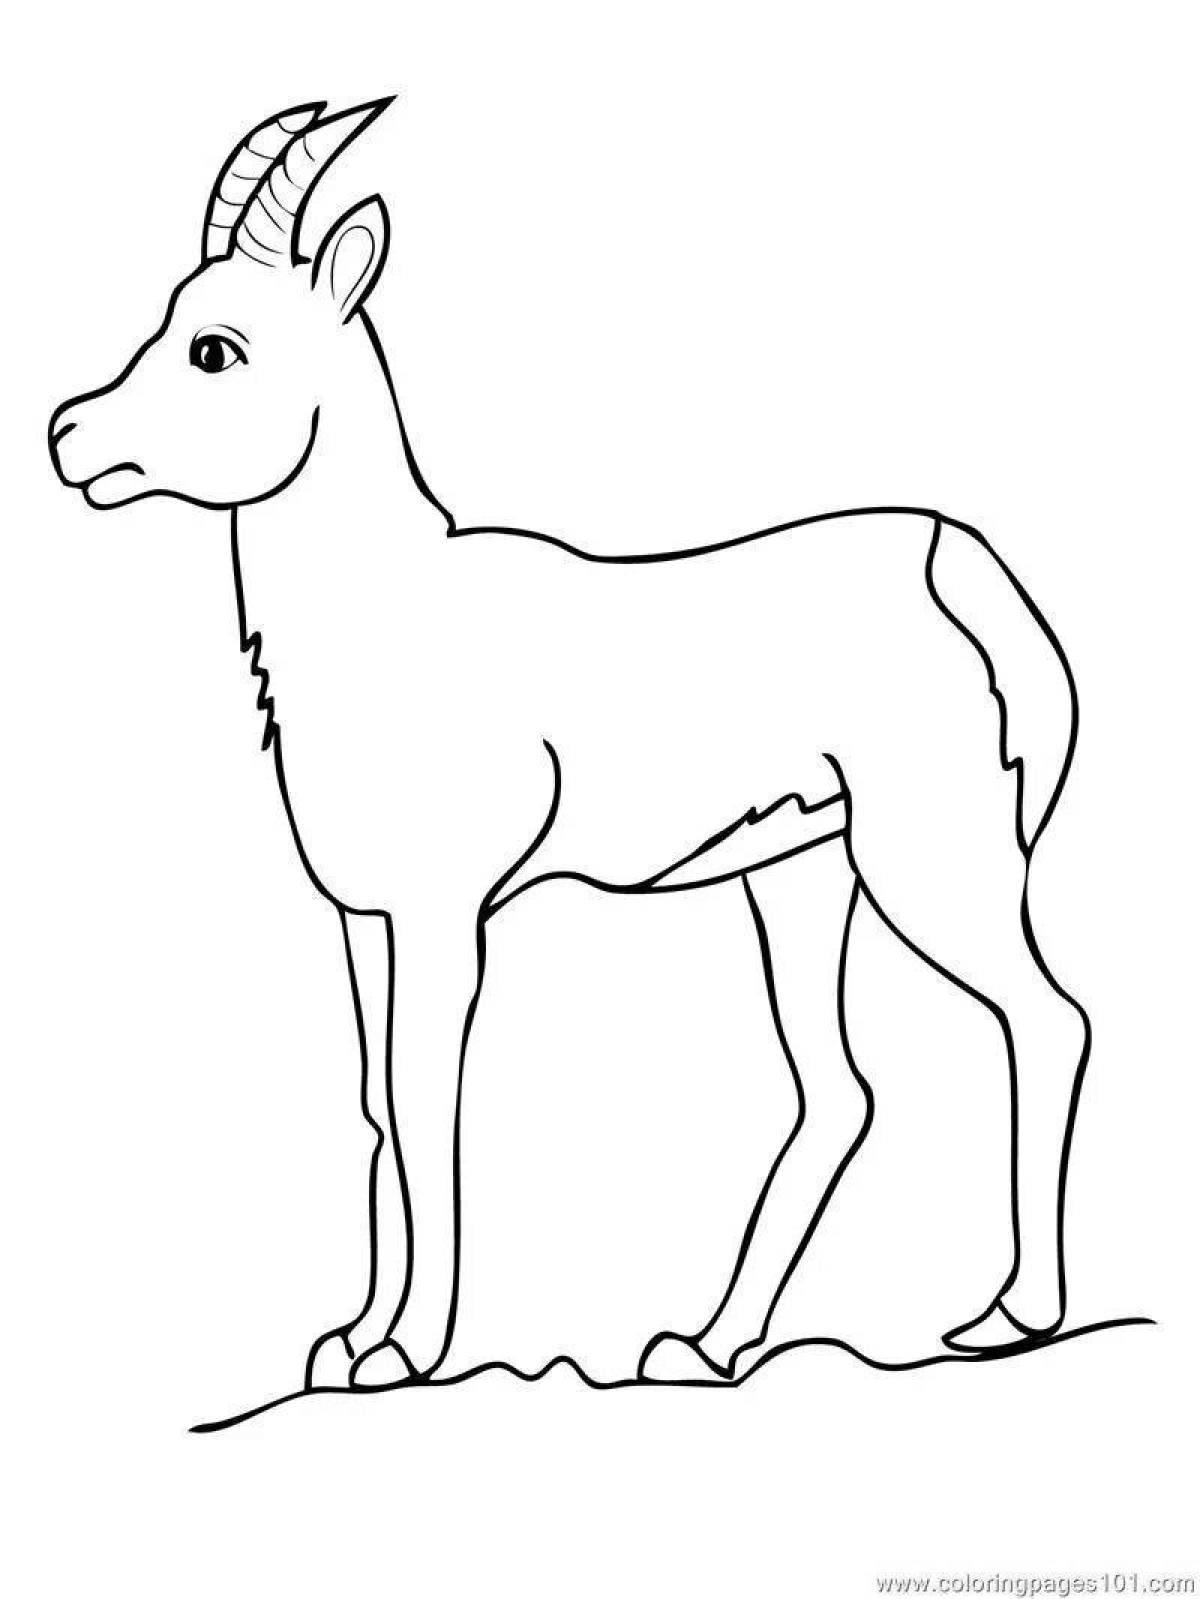 Amazing antelope coloring book for kids